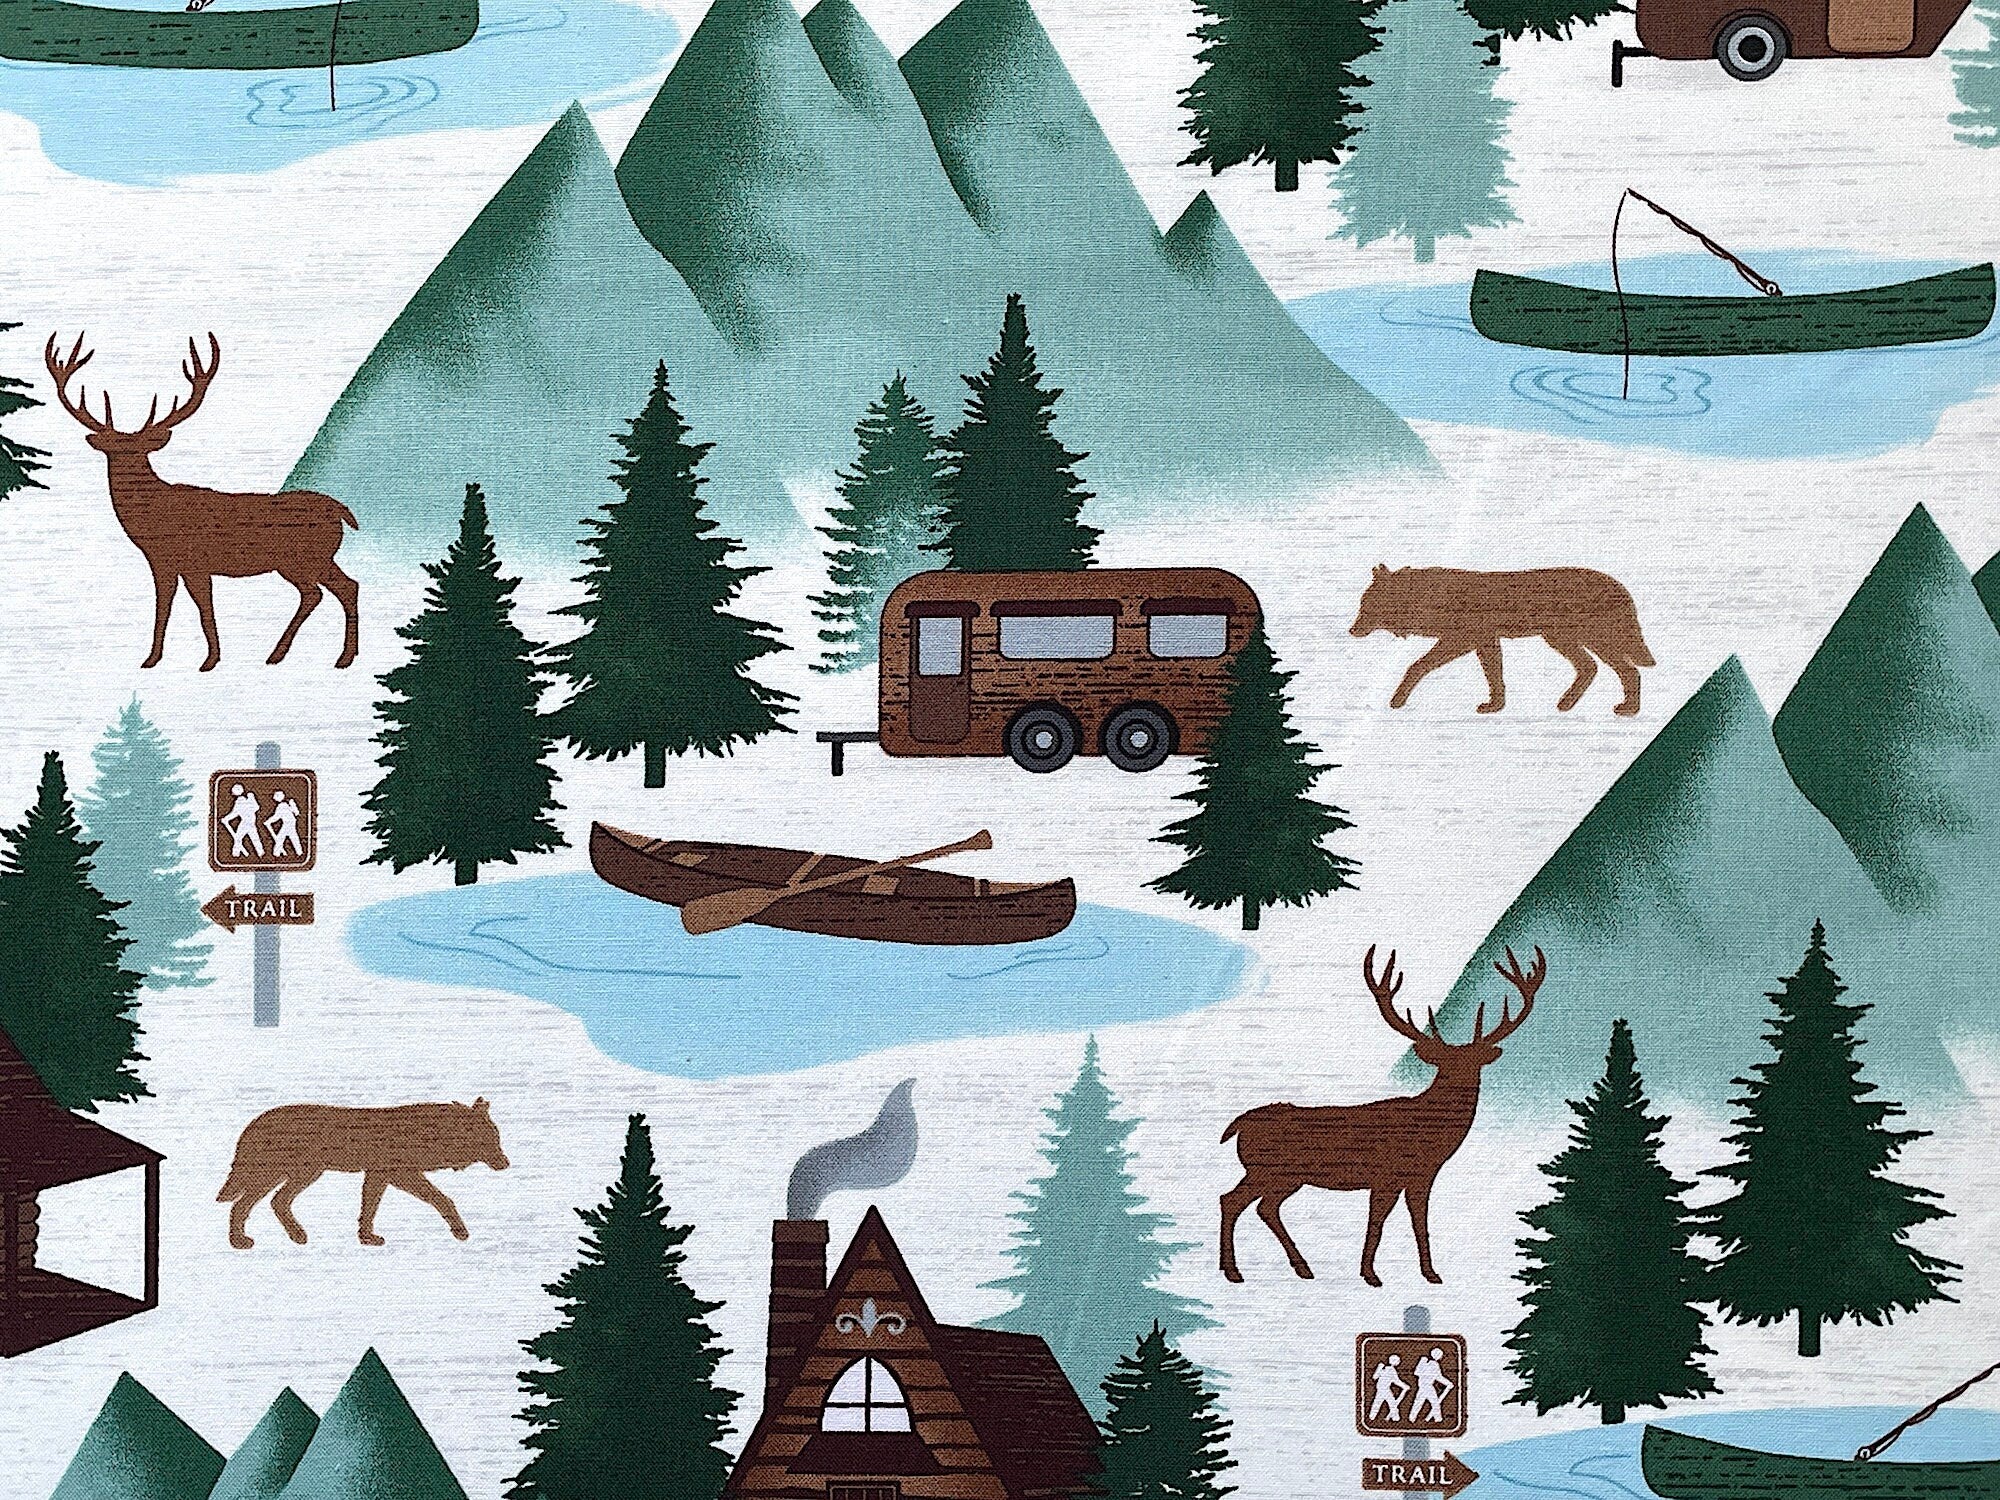 This fabric is part of the At the Cabin collection by Kanvas Studio. This fabric is covered with cabins, deer, trees, travel trailers, canoes and more.